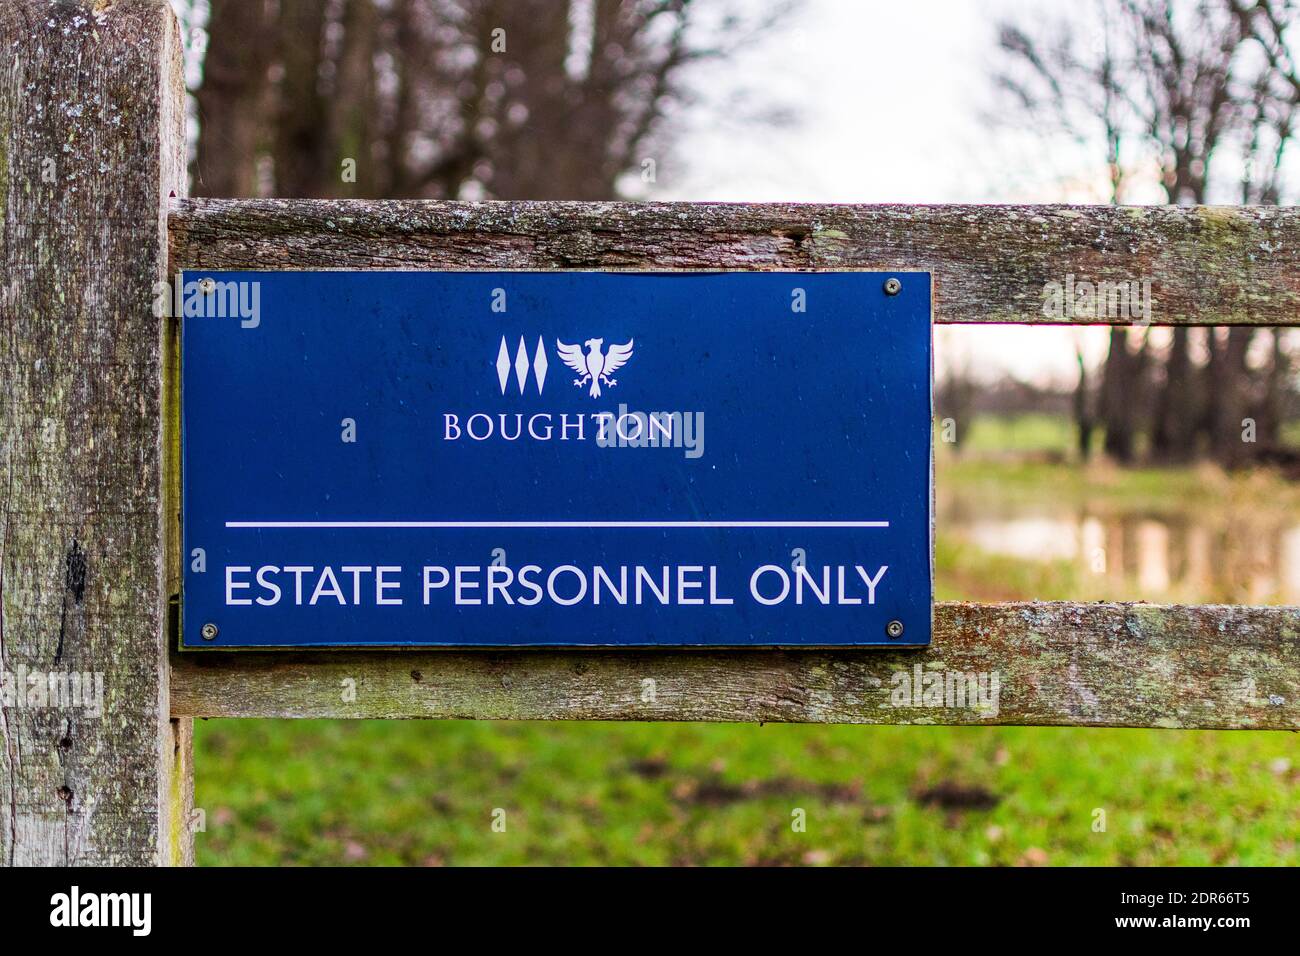 boughton estate personnel only Stock Photo